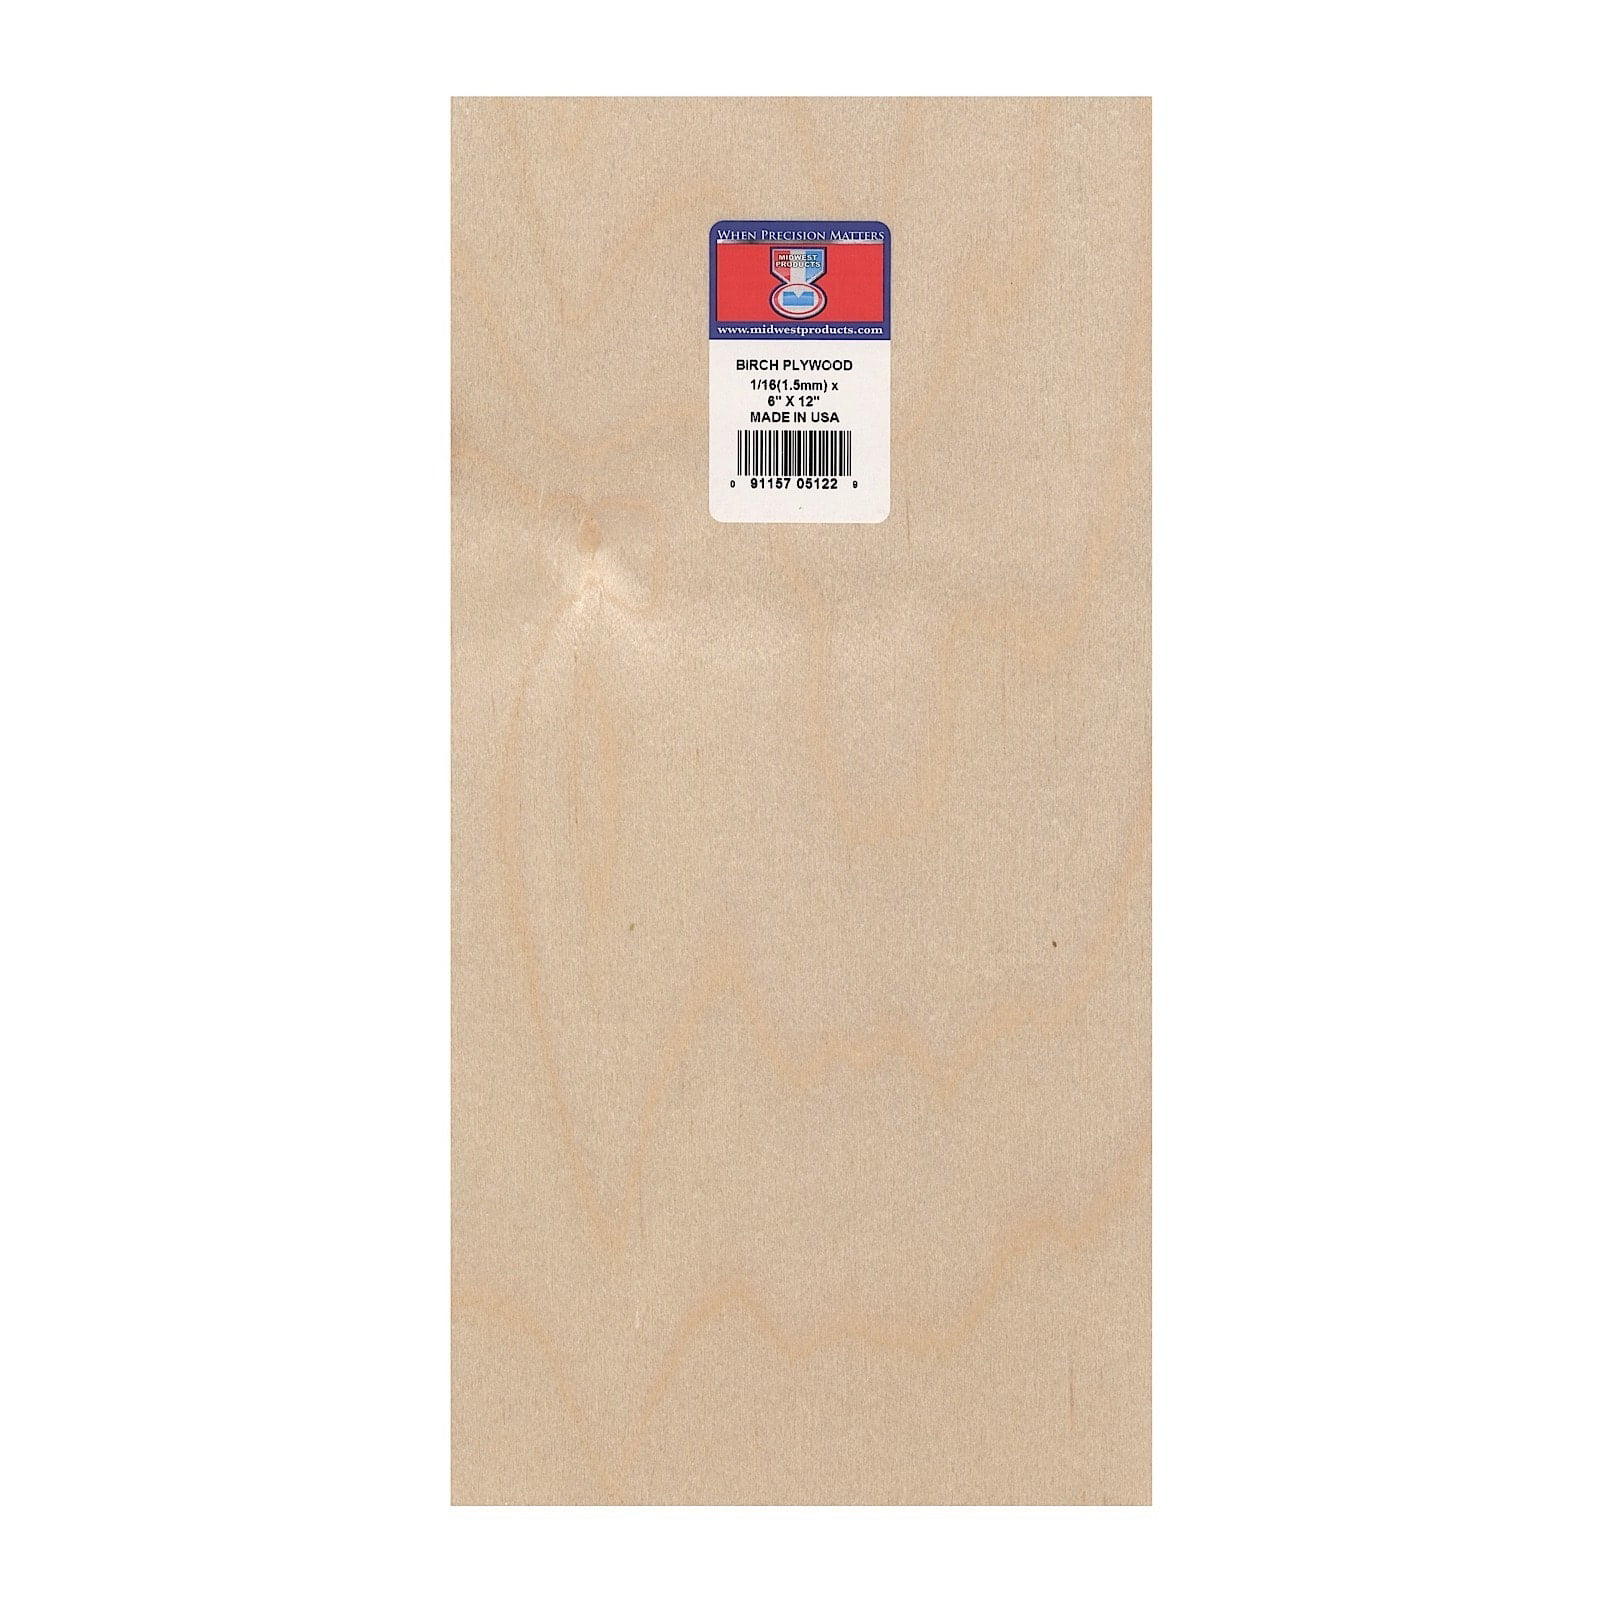 Midwest Products 5482 1/16" x 12" x 48" Birch Plywood Sheet Pack of 6 